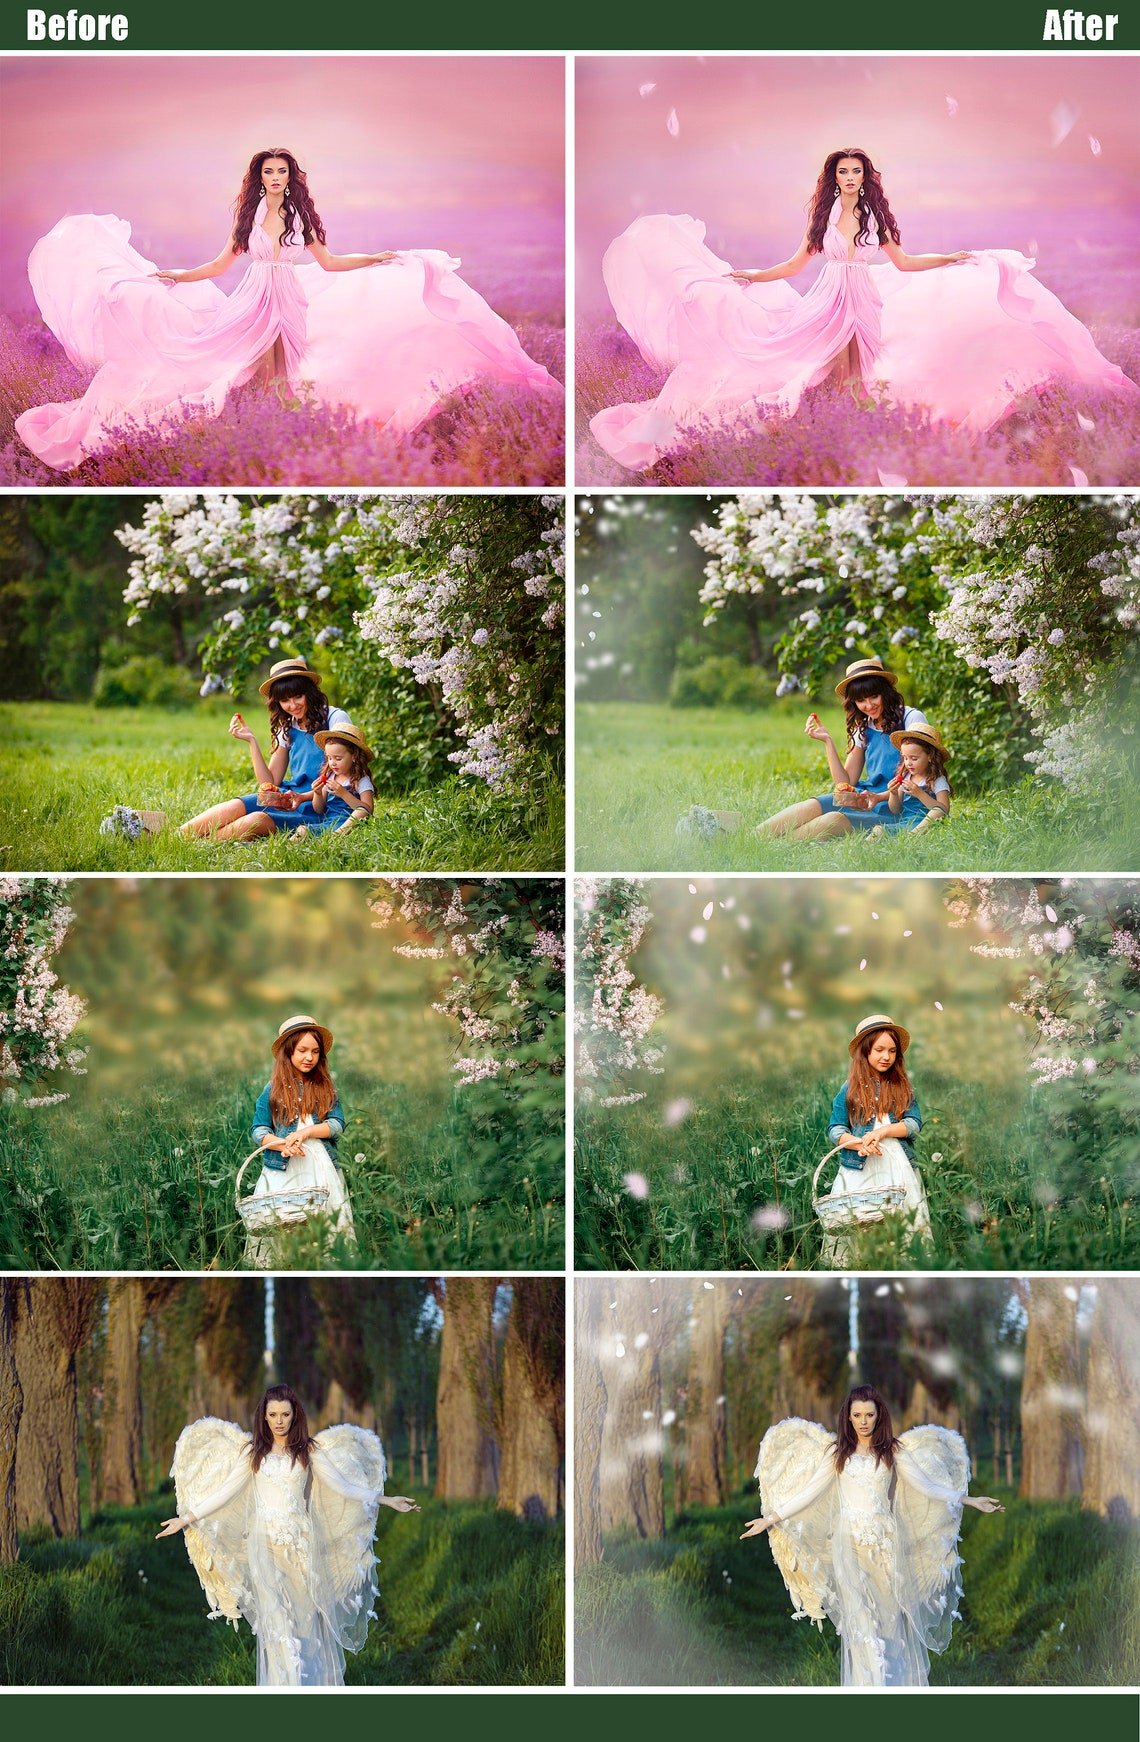 Falling Petals Photo Overlays, pngpreview image.